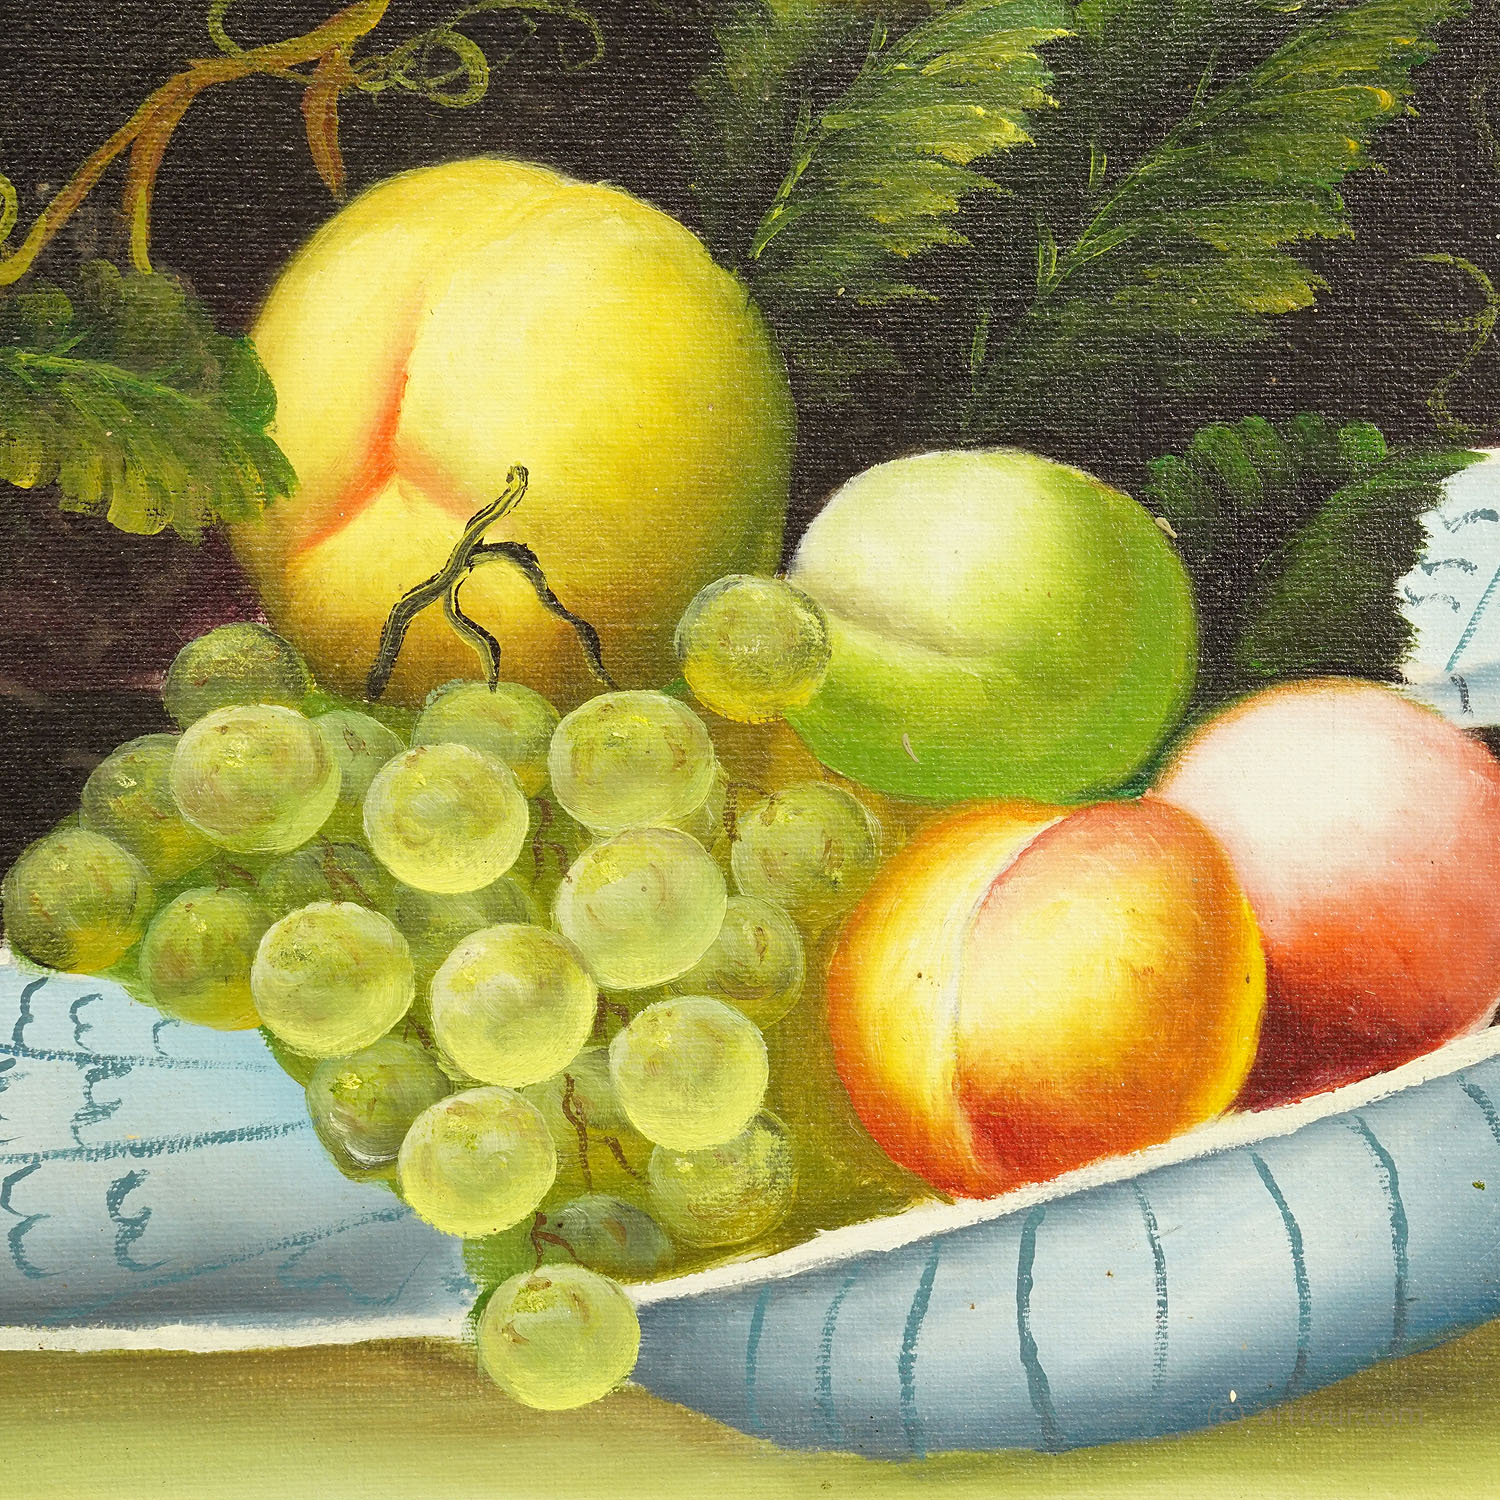 Still Life with Fruits, Oil Painting on Canvas, Germany 1950s